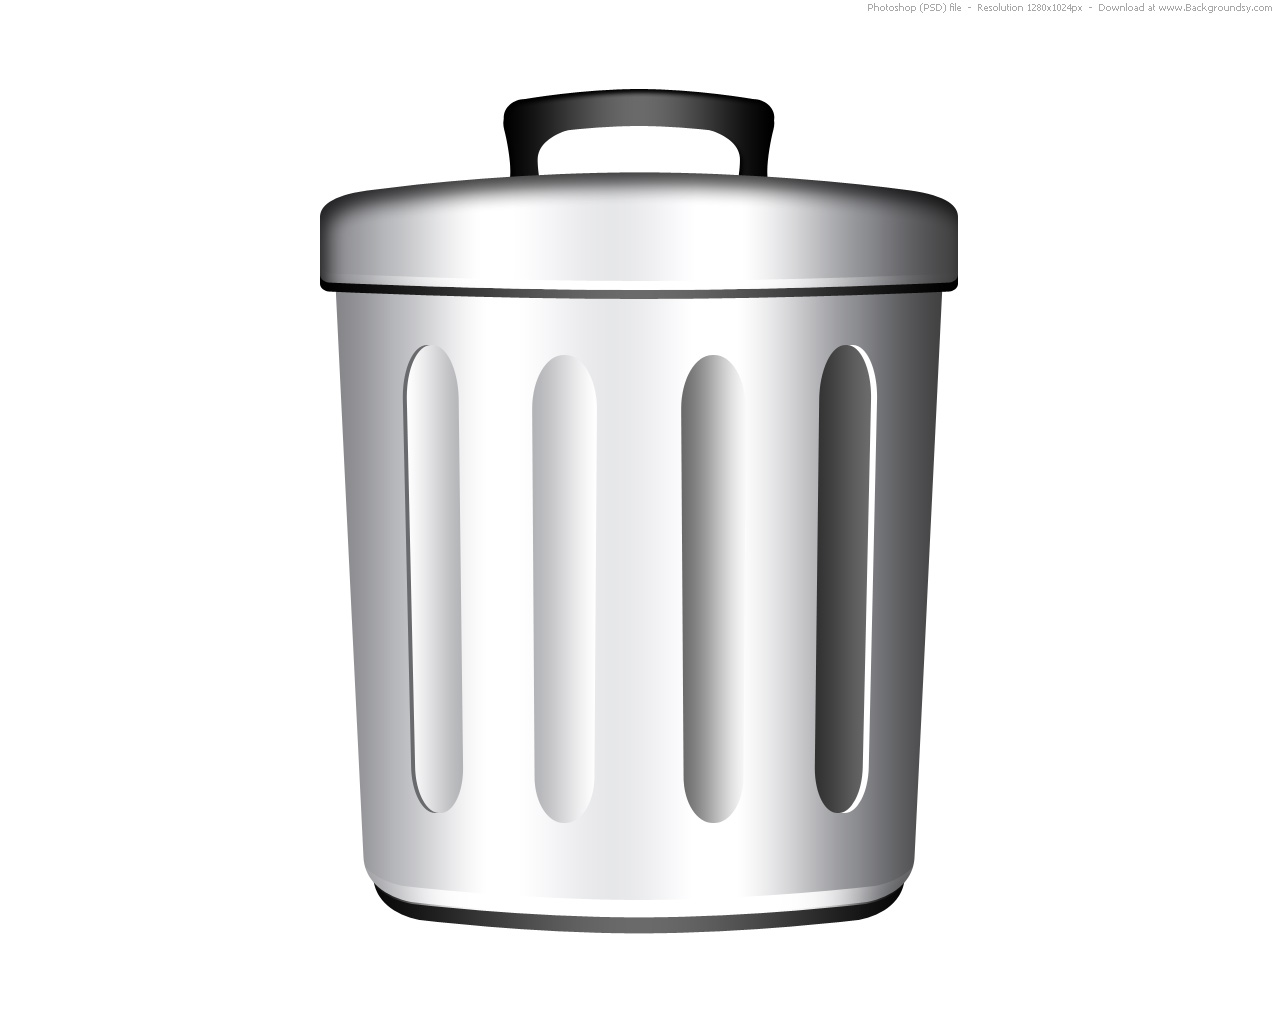 Trash can icon (PSD) | Backgroundsy.